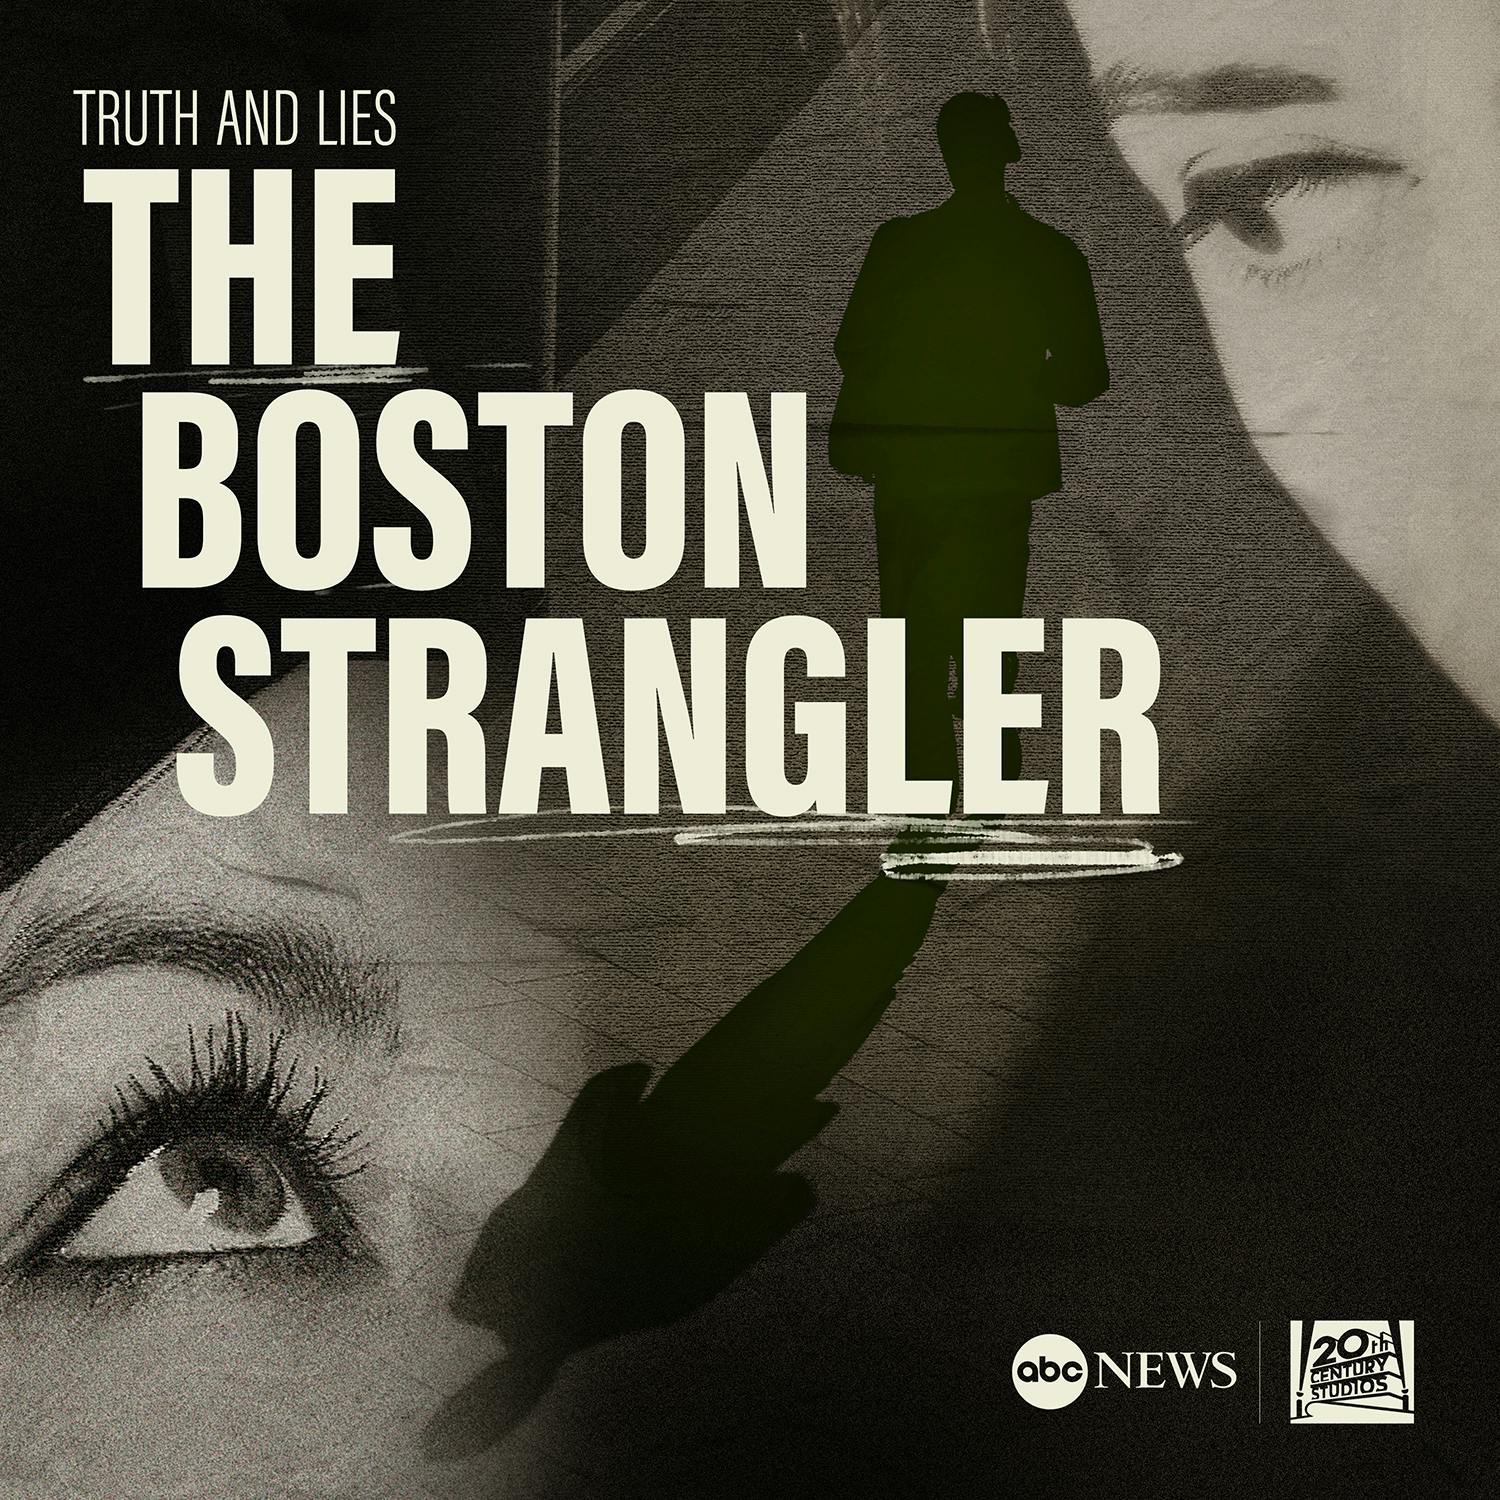 Trailer: Introducing ”Truth and Lies: The Boston Strangler”